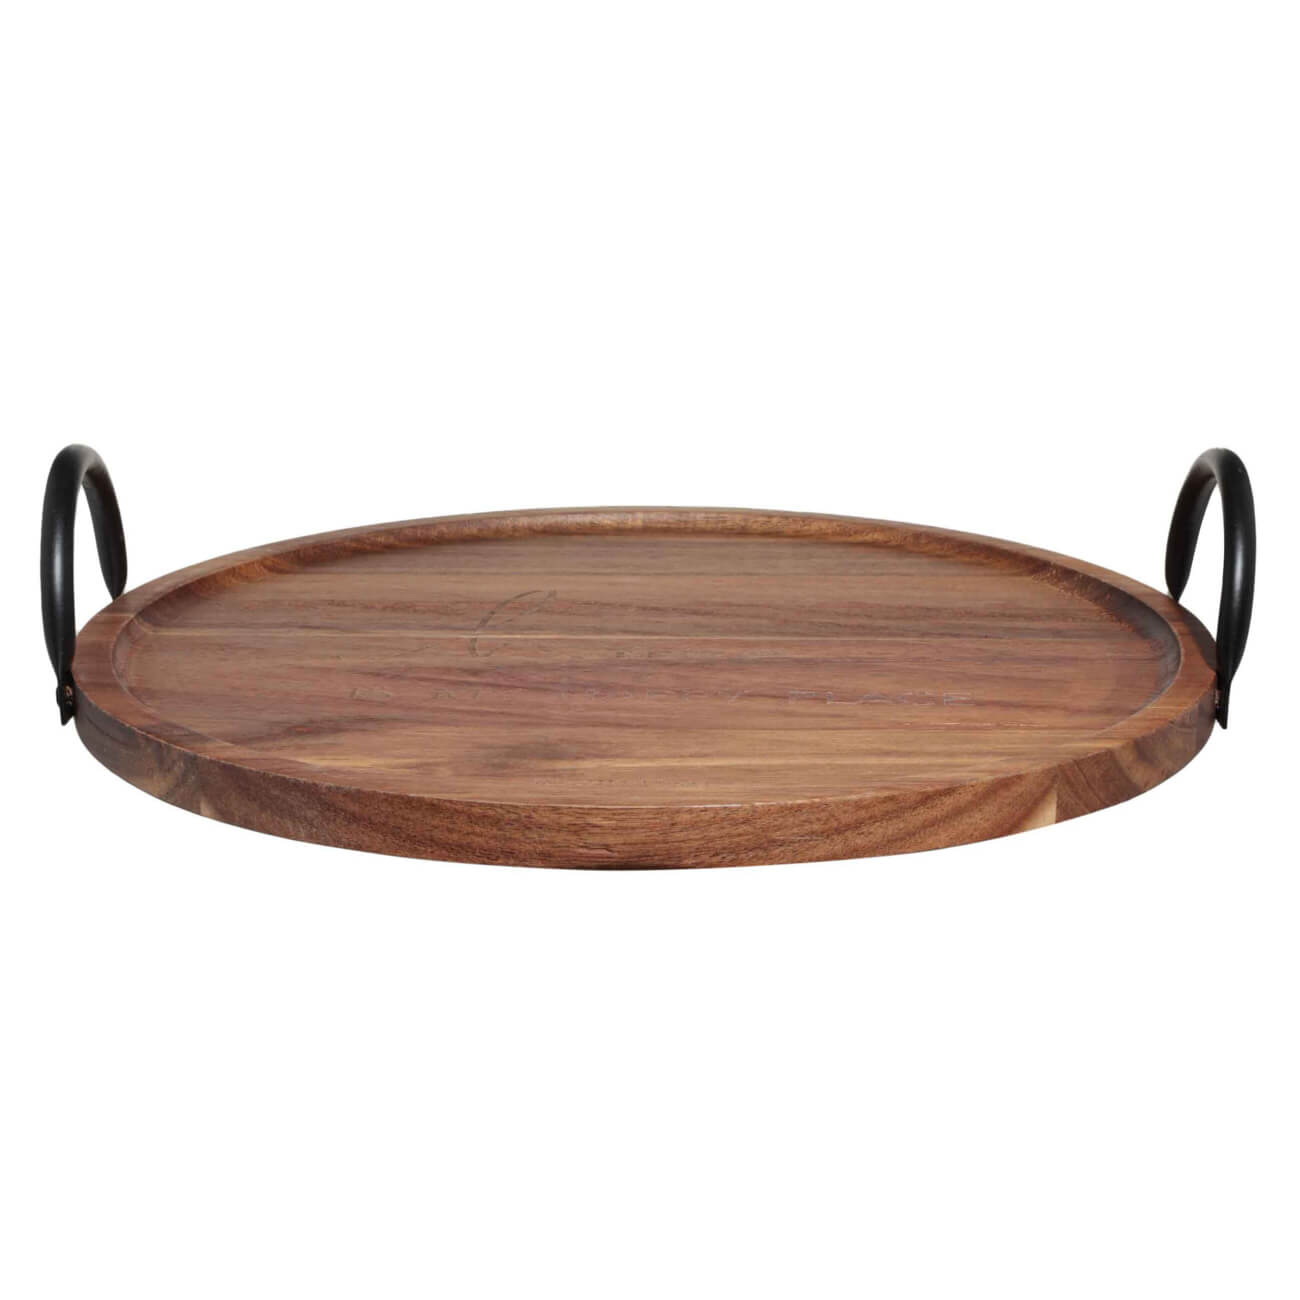 Tray, 30 cm, with handles, wood / metal, round, Home, Noble tree изображение № 1